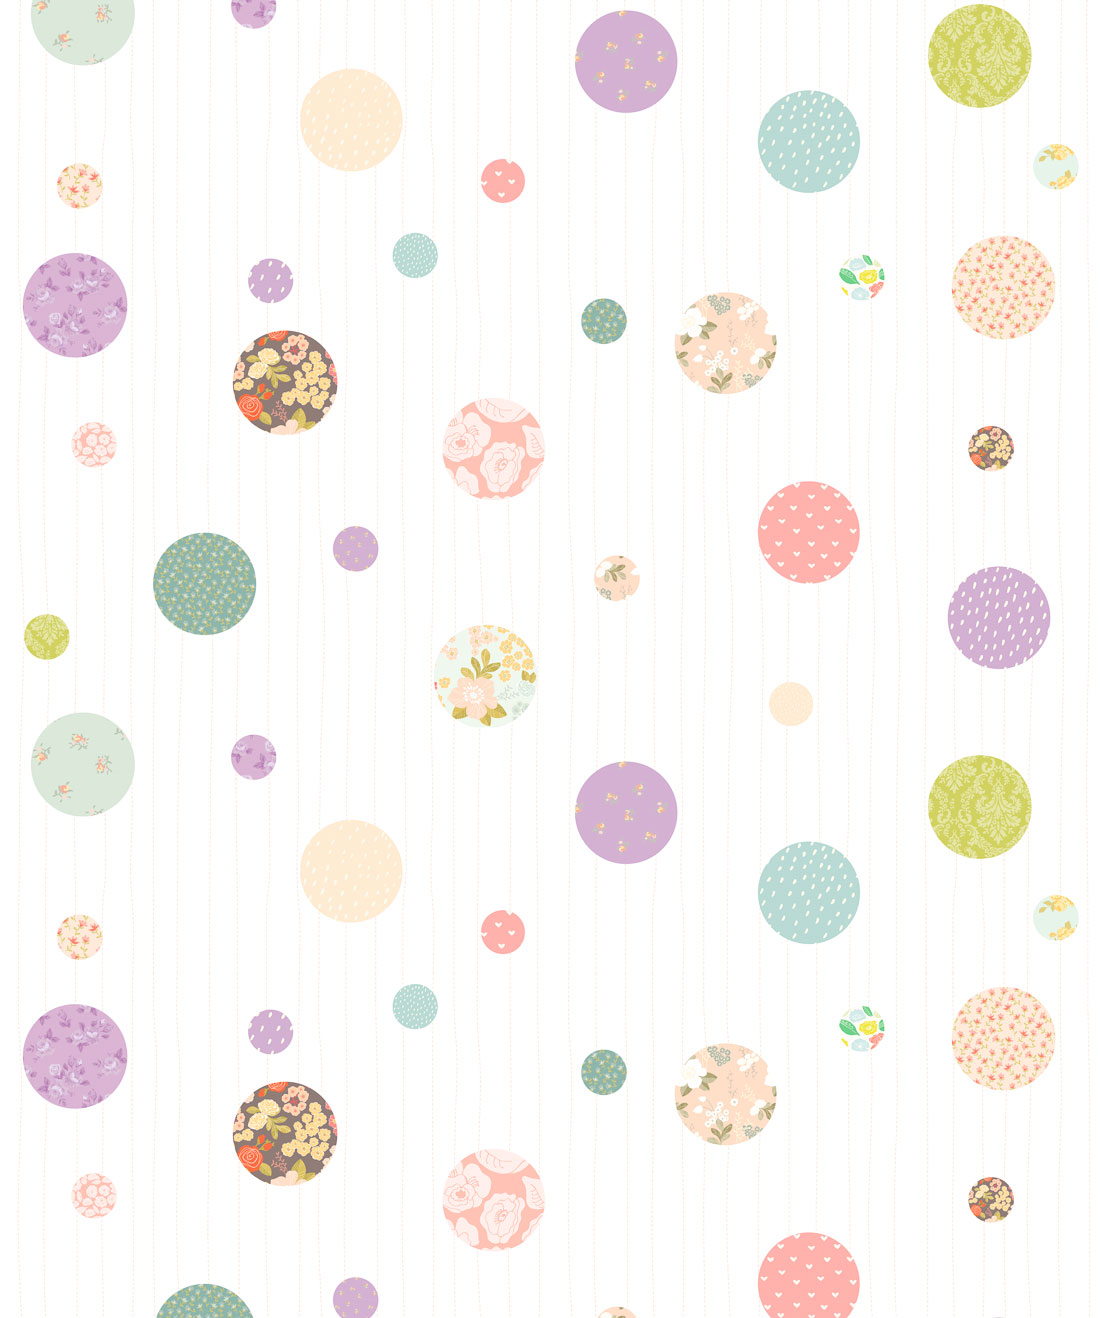 Seamless Pattern With Polka Dots With Bright Color Wallpaper Wrapping  Decorative Paper Vector Illustration Stock Illustration  Download Image  Now  iStock